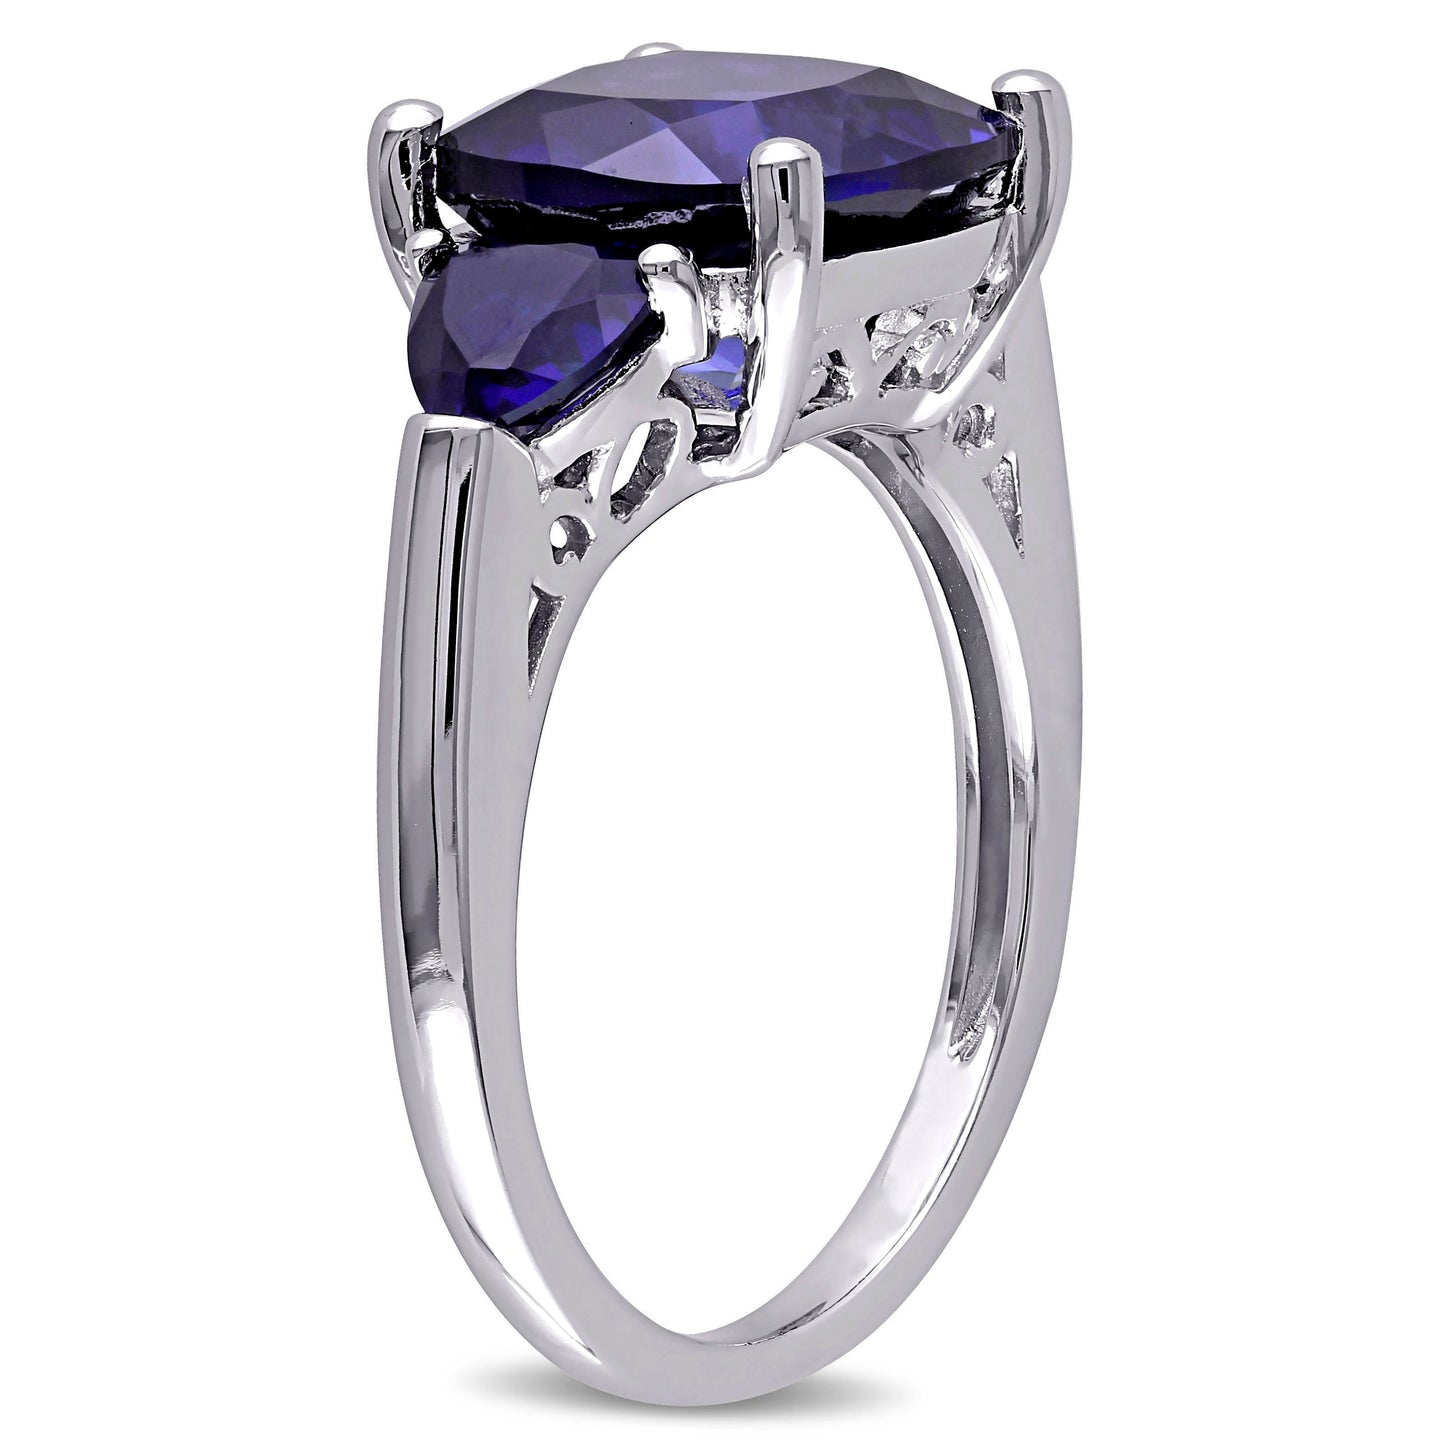 3 Stone Blue Sapphire Ring in Sterling Silver